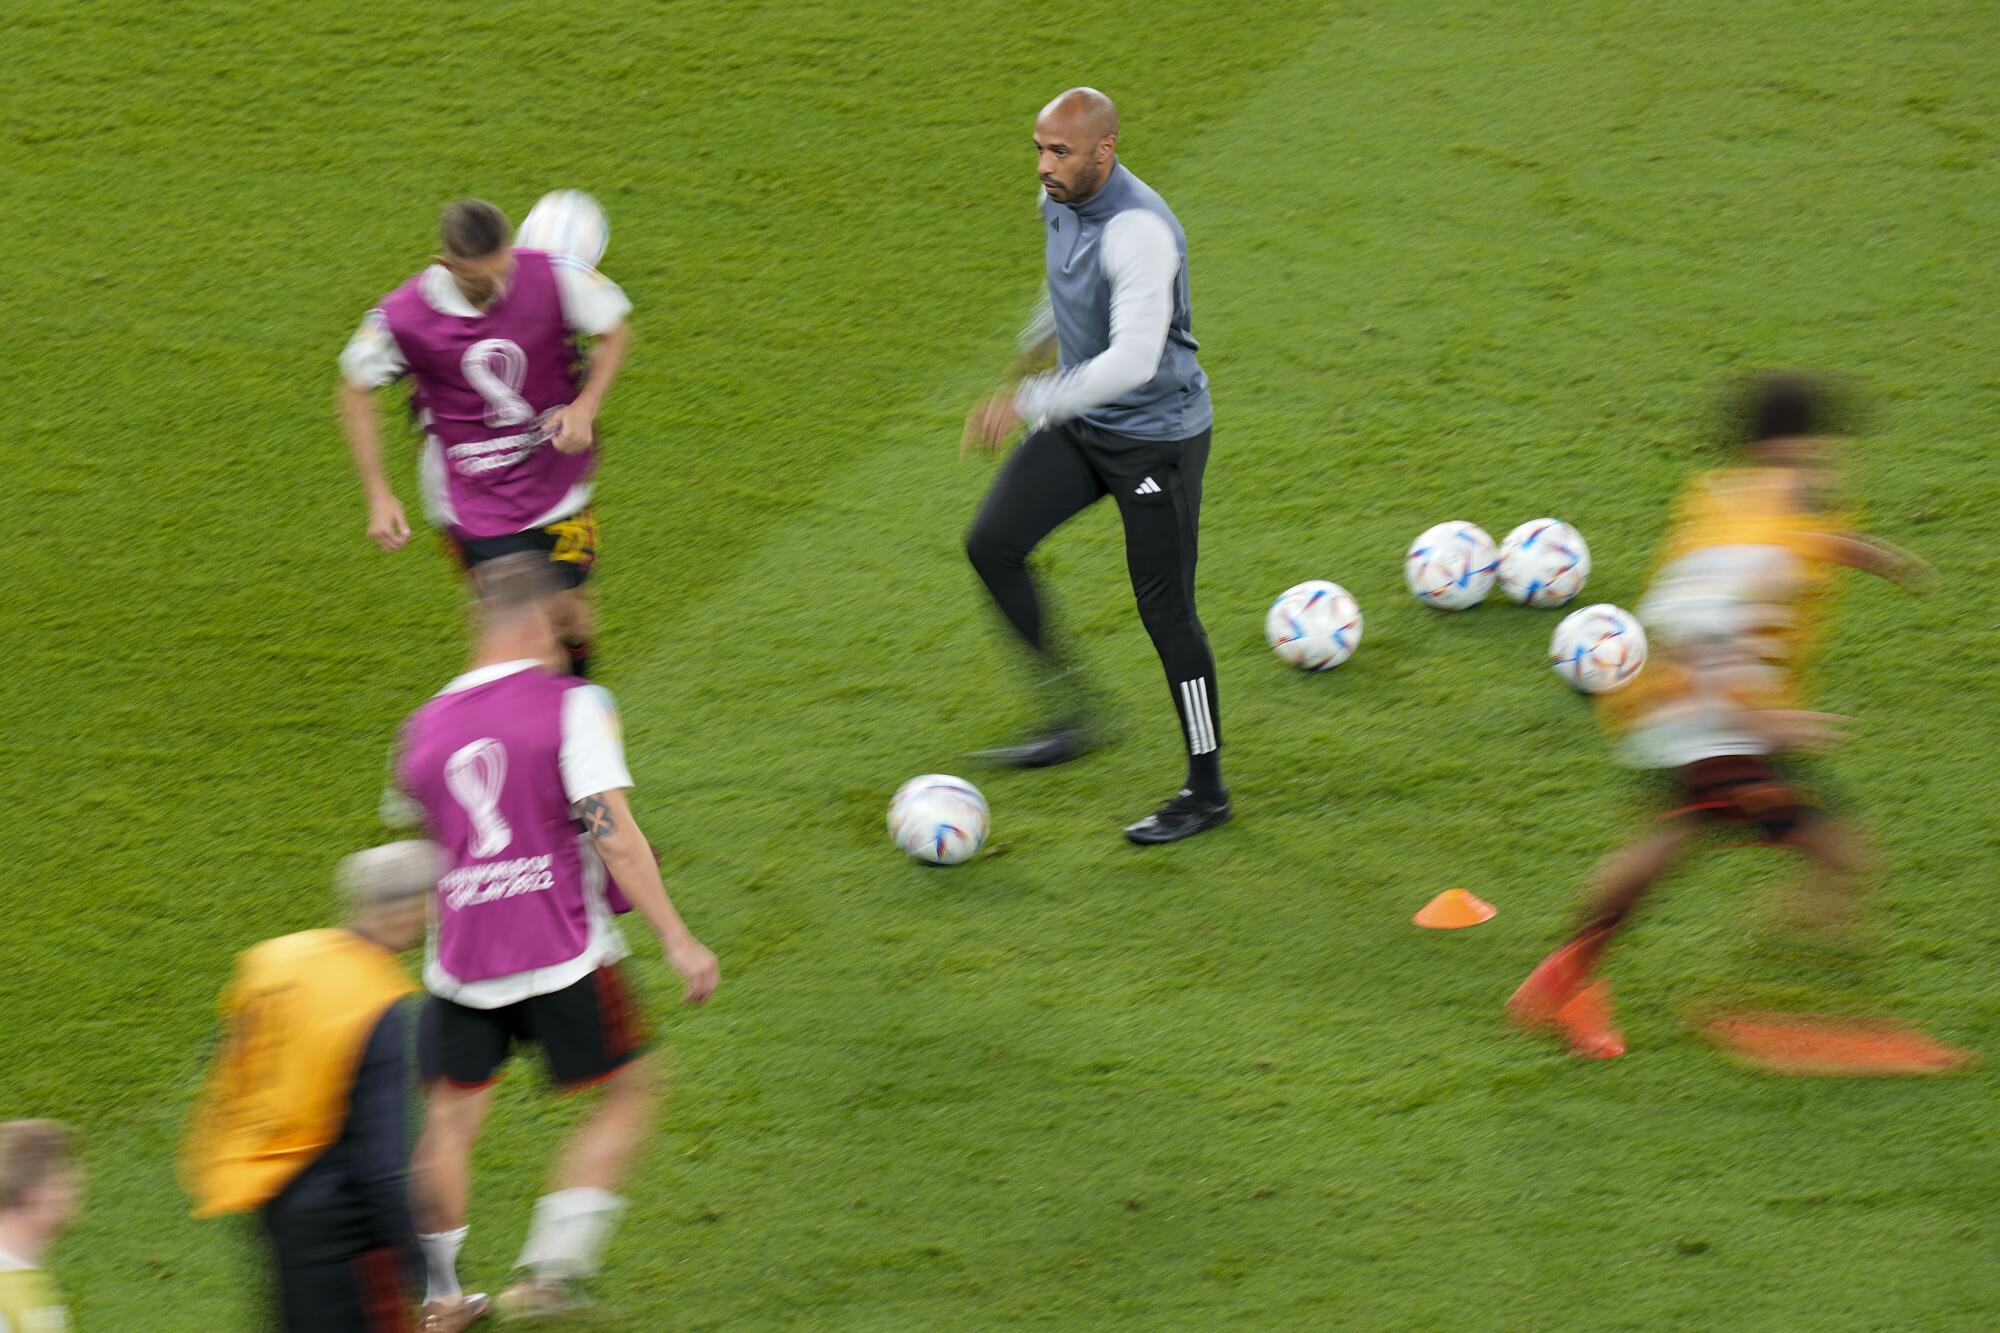 Belgium assistant coach Thierry Henry watches during warmups before the World Cup match between Belgium and Canada.